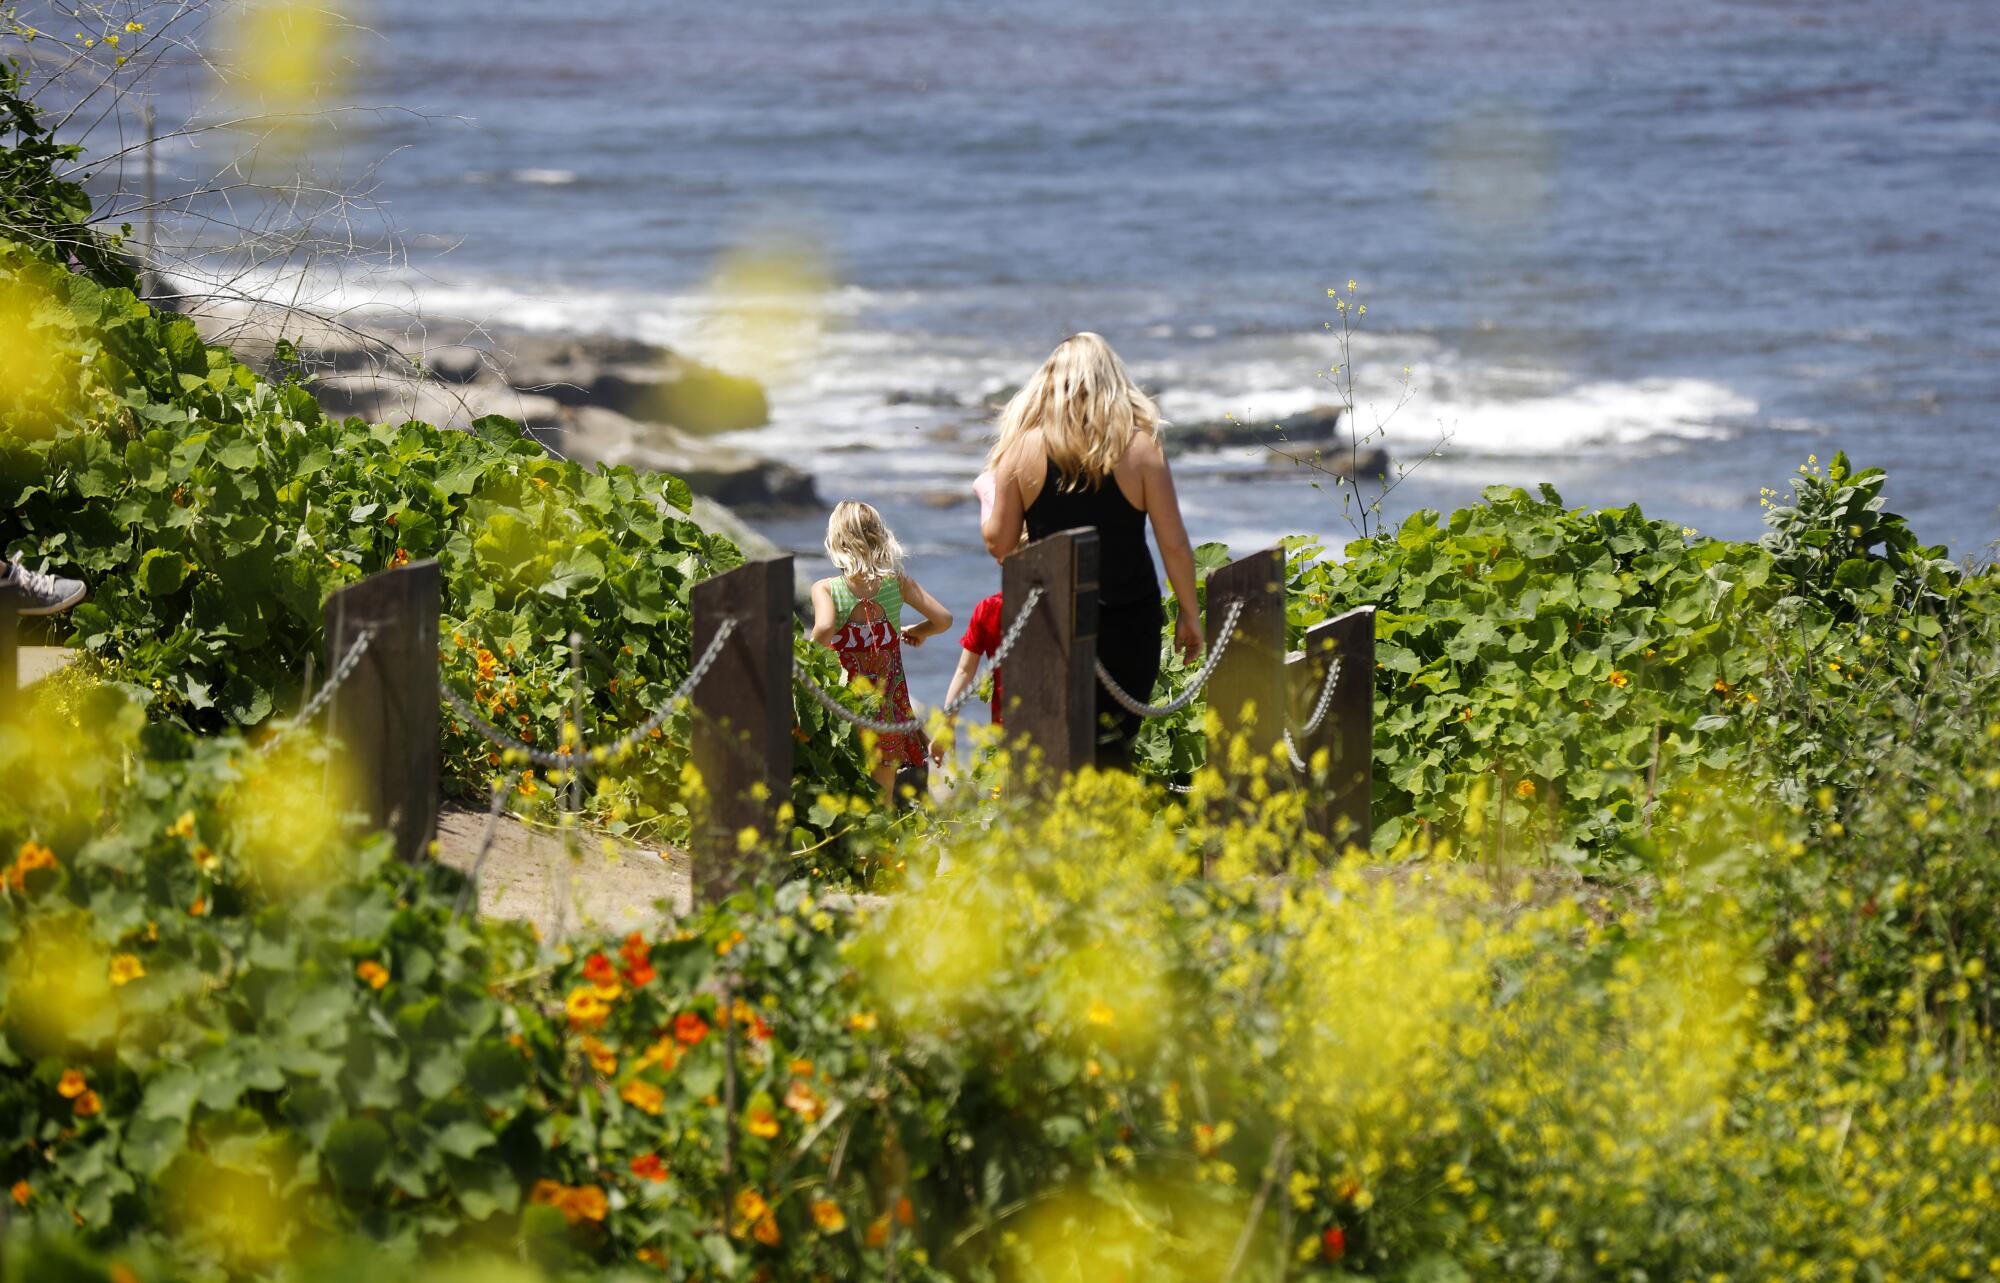 A woman and child walk away from the camera on a path surrounded by vines and flowers toward the ocean.